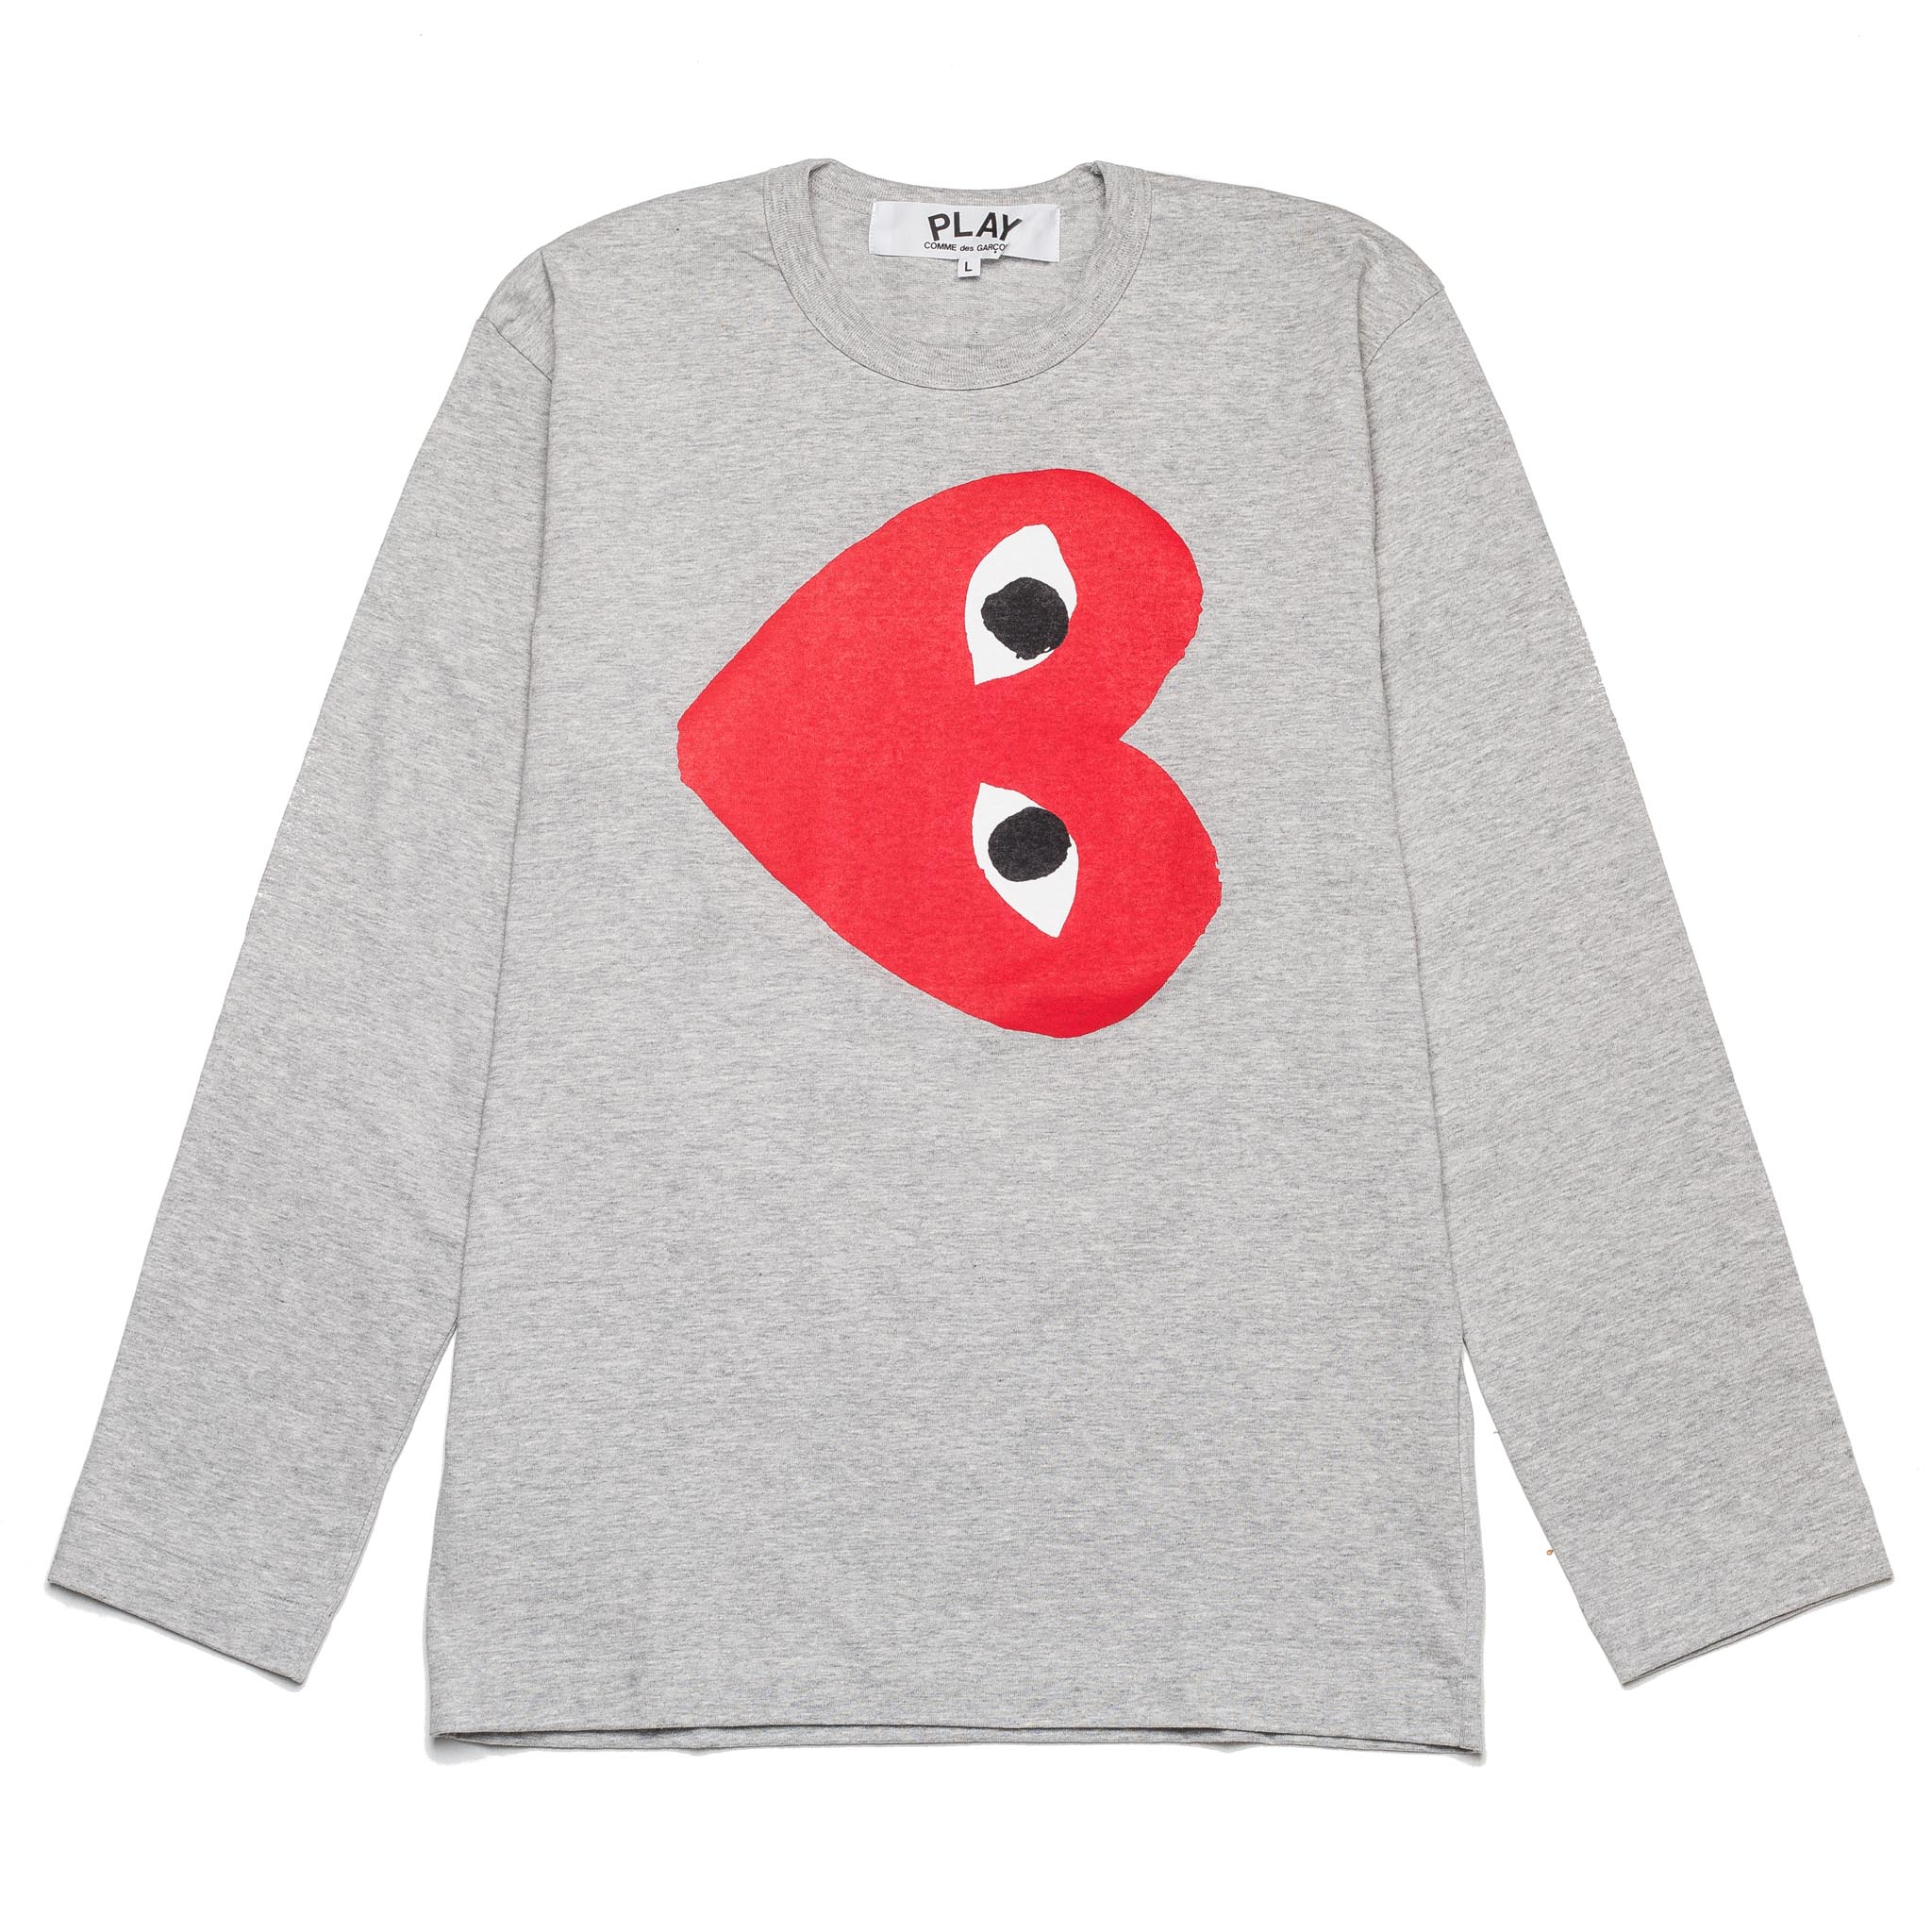 comme des garcons play long sleeve basic logo tee